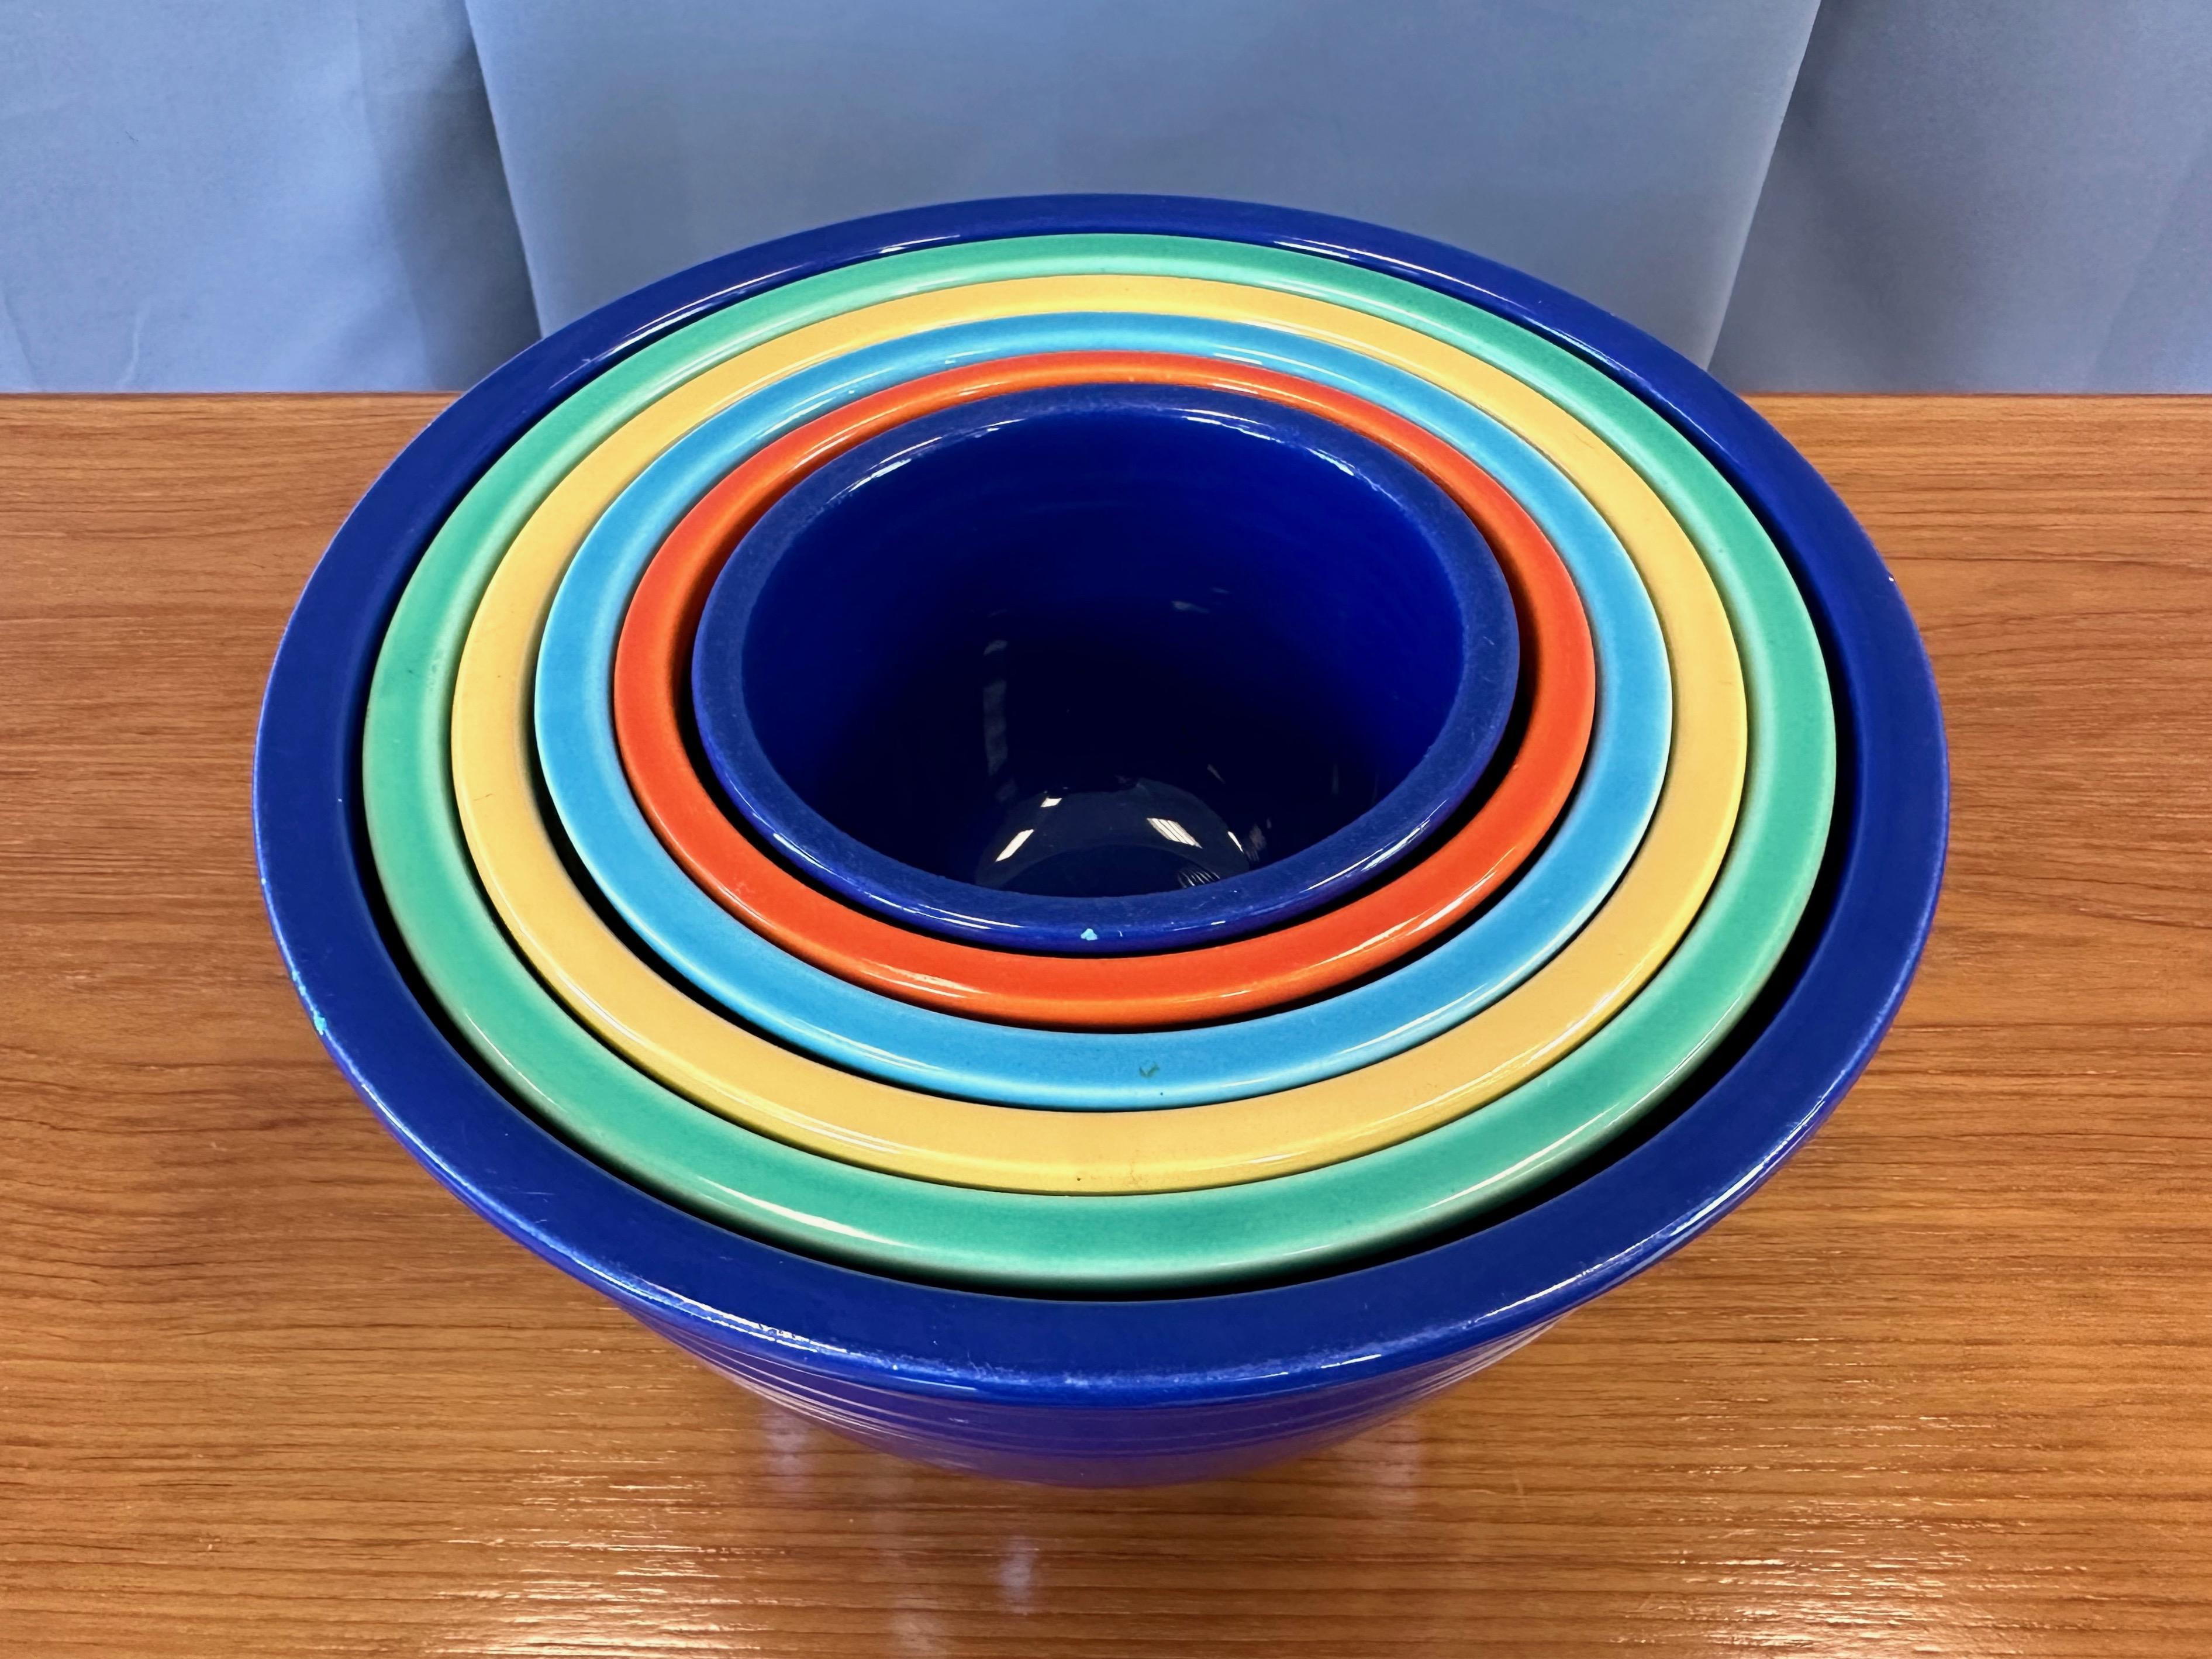 Ceramic Early Vintage Fiestaware Nesting Mixing Bowls, Multi-Color Set of Six, c. 1940 For Sale